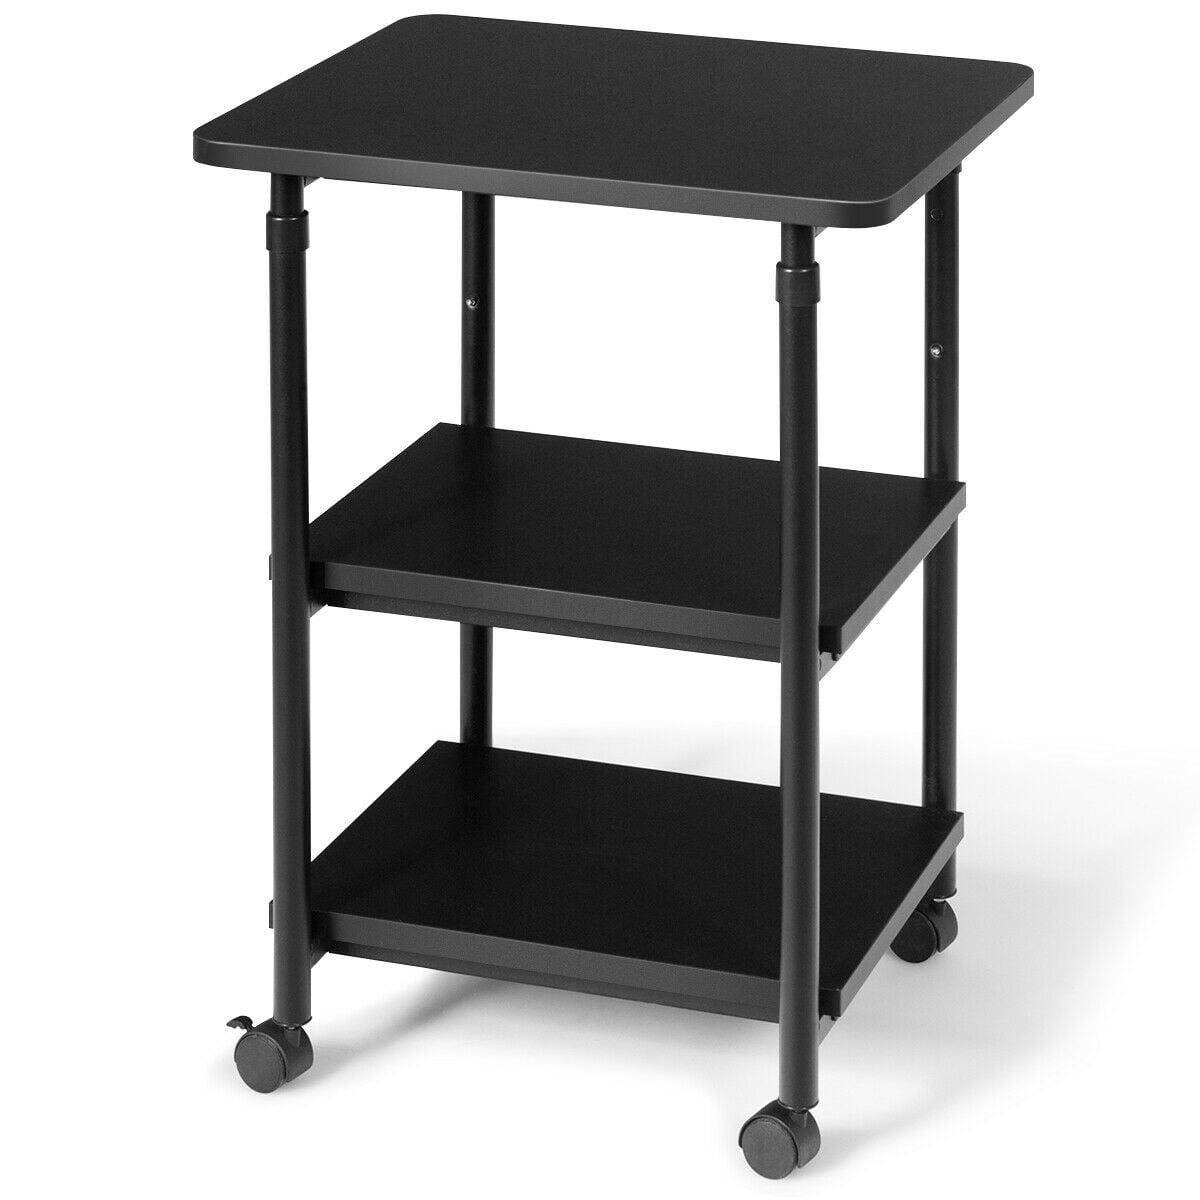 Fitueyes Printer Stand on Wheels Mobile Under Desk Work Cart Ps304005ww